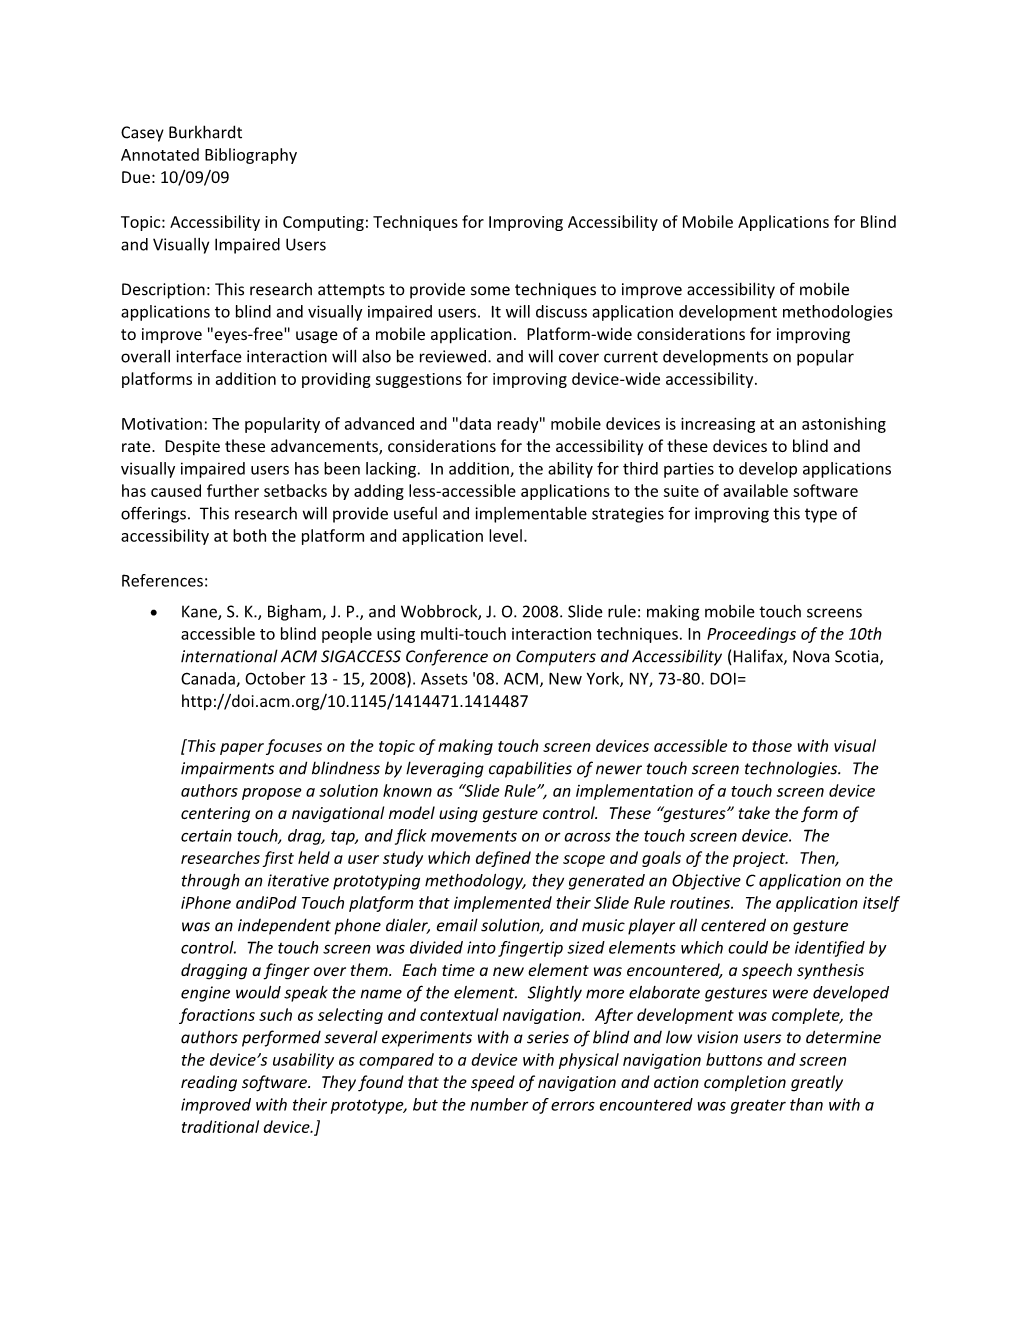 Casey Burkhardt Annotated Bibliography Due: 10/09/09 Topic: Accessibility in Computing